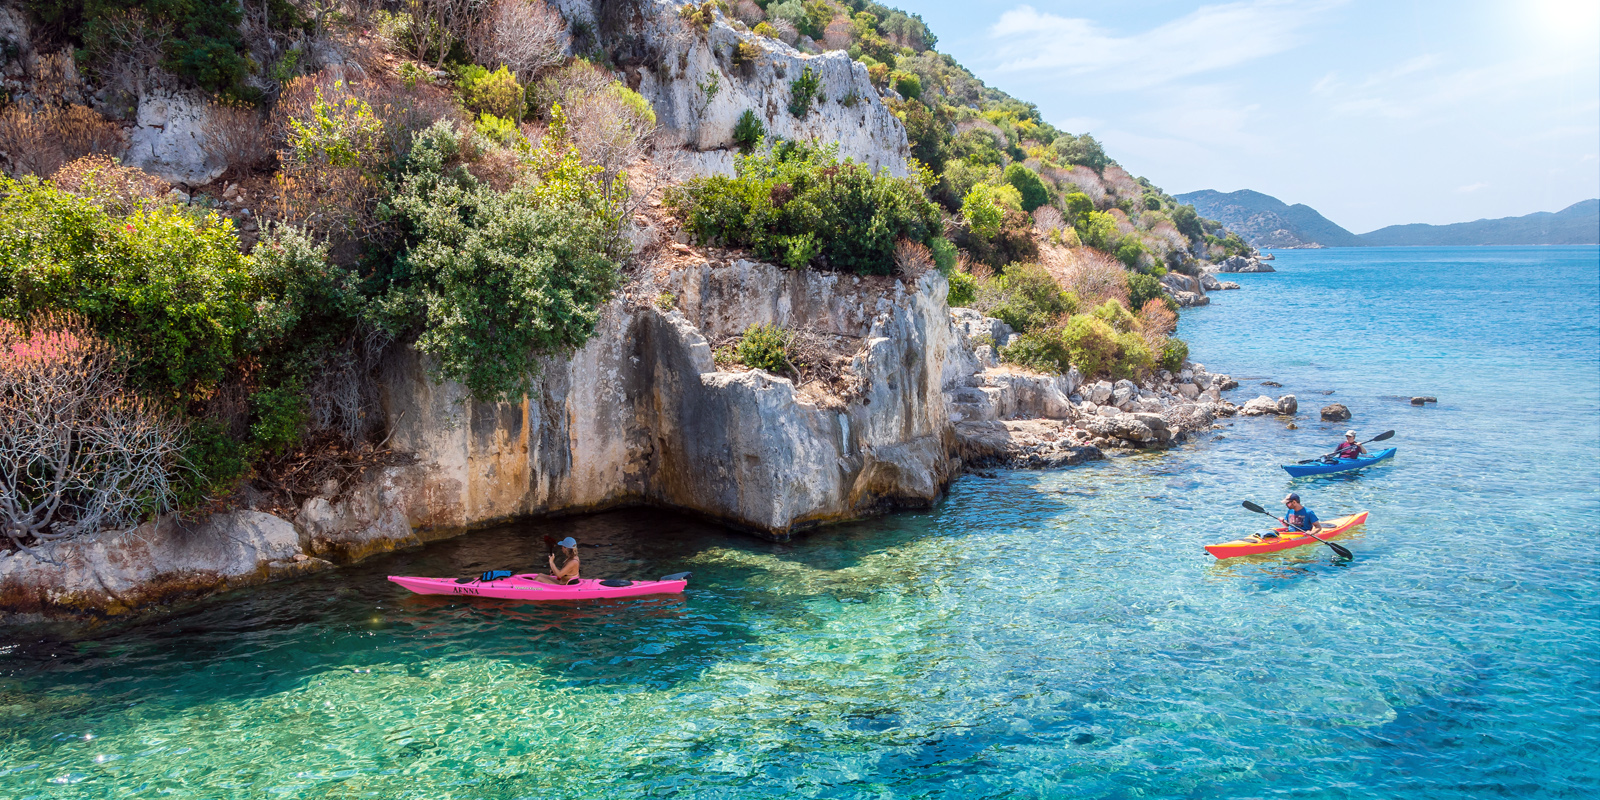 Image of Tourists Canoeing during Vacation in Turkey